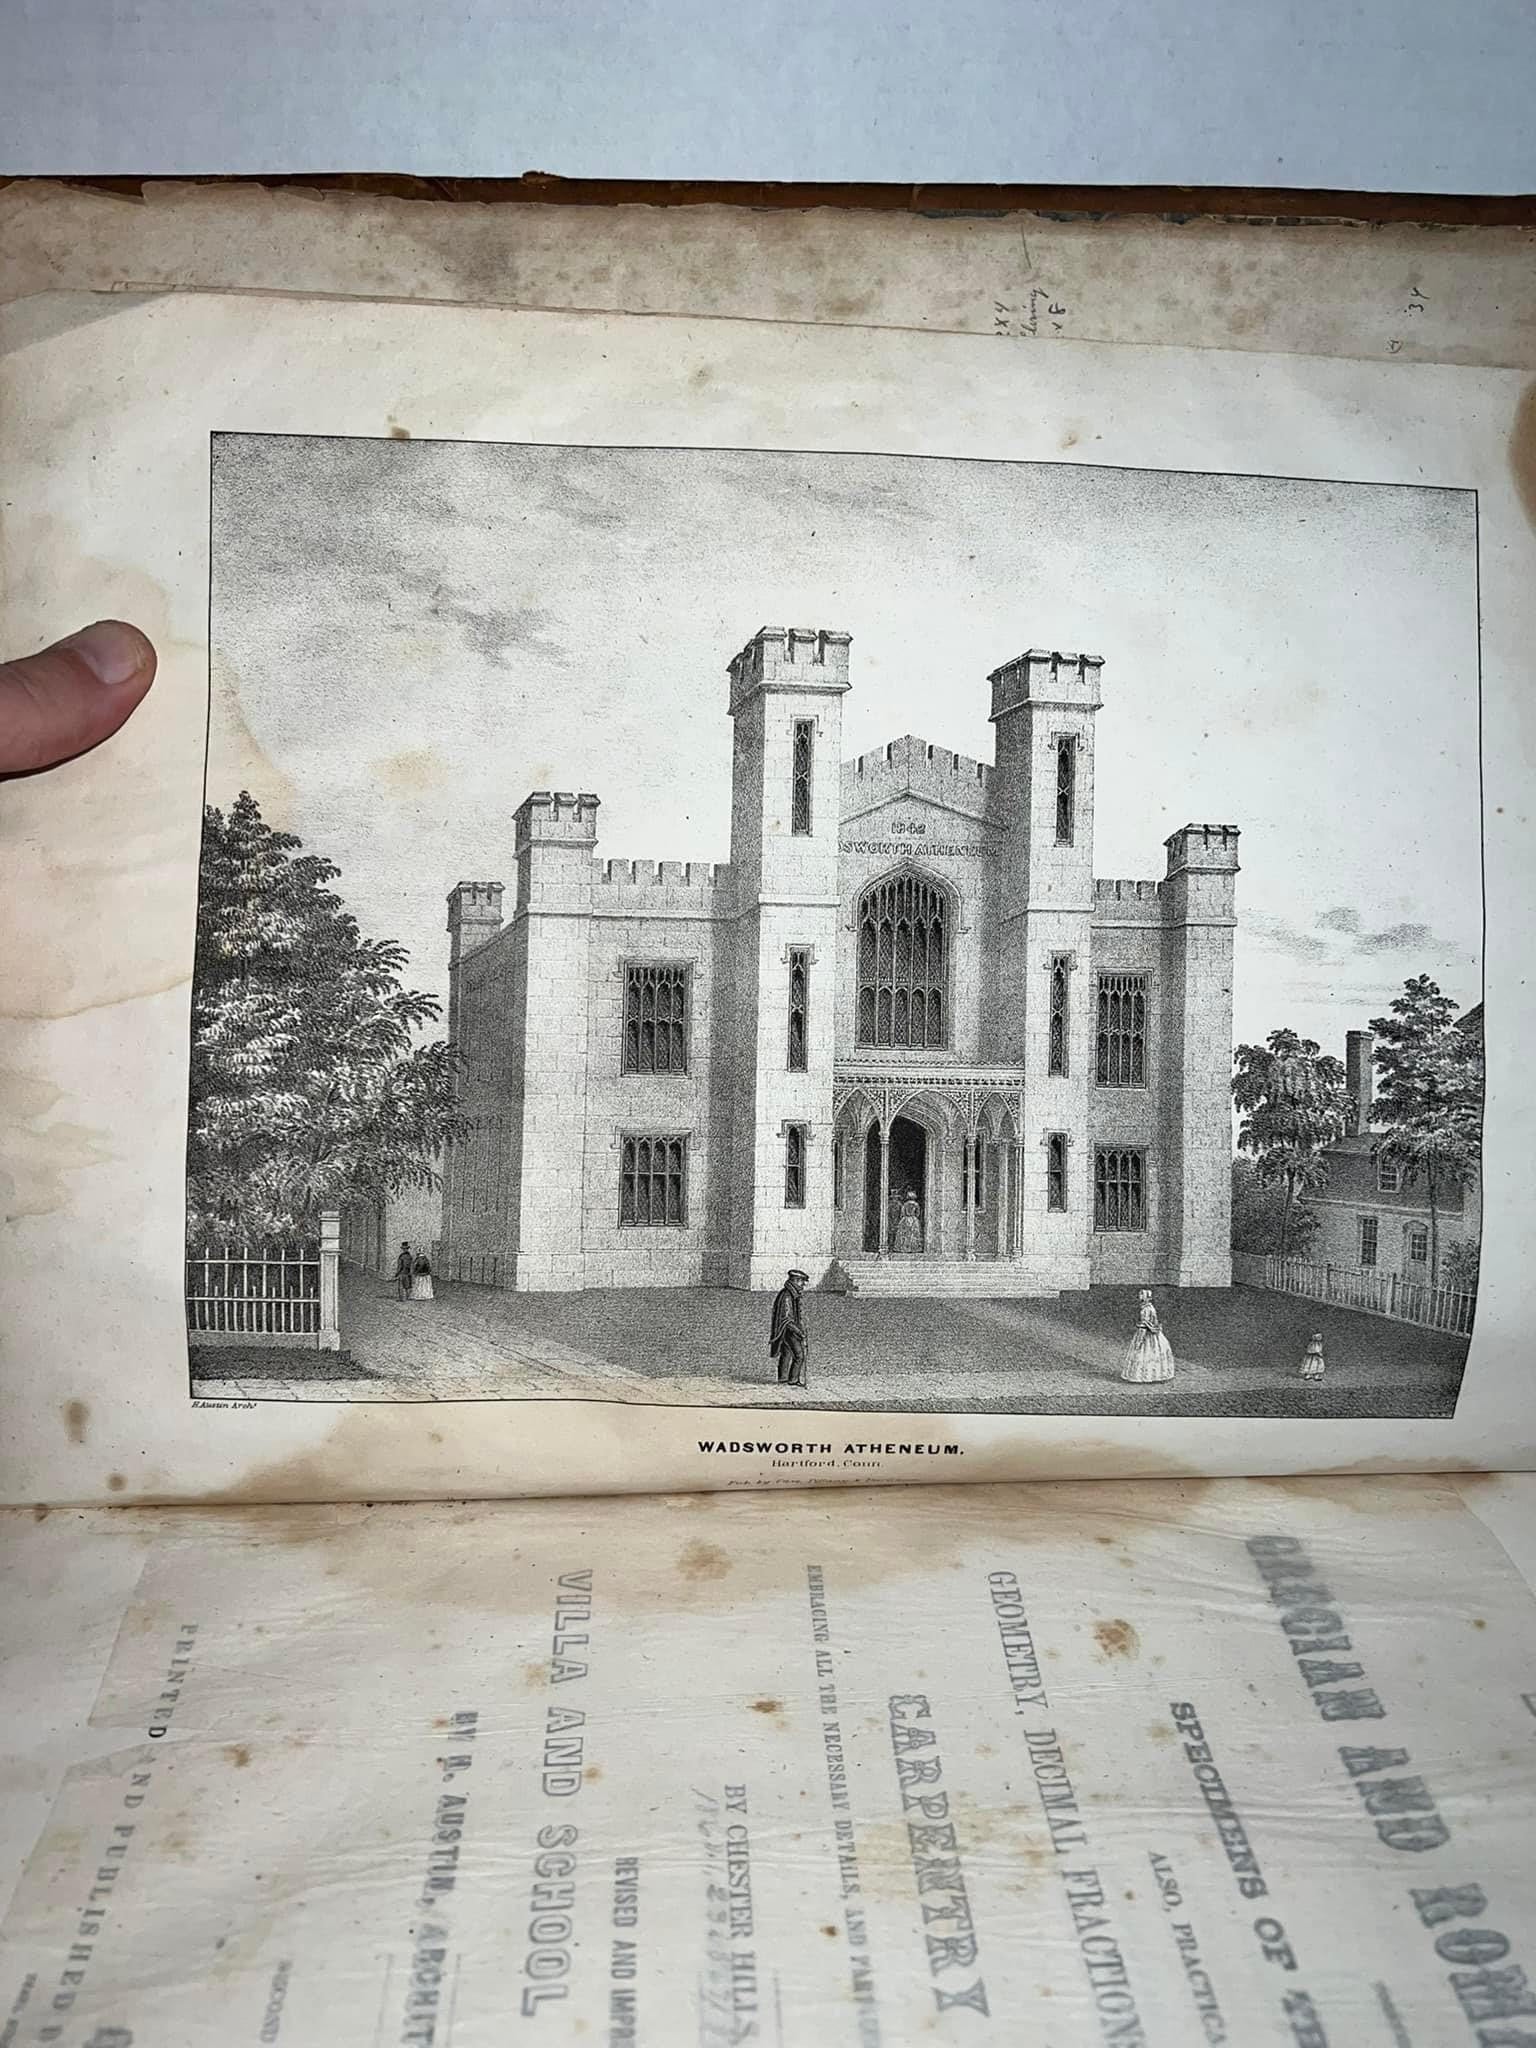 Antique 1847 The builders guide a practical treatise on Grecian and Roman architecture Together with specimens of the gothic style